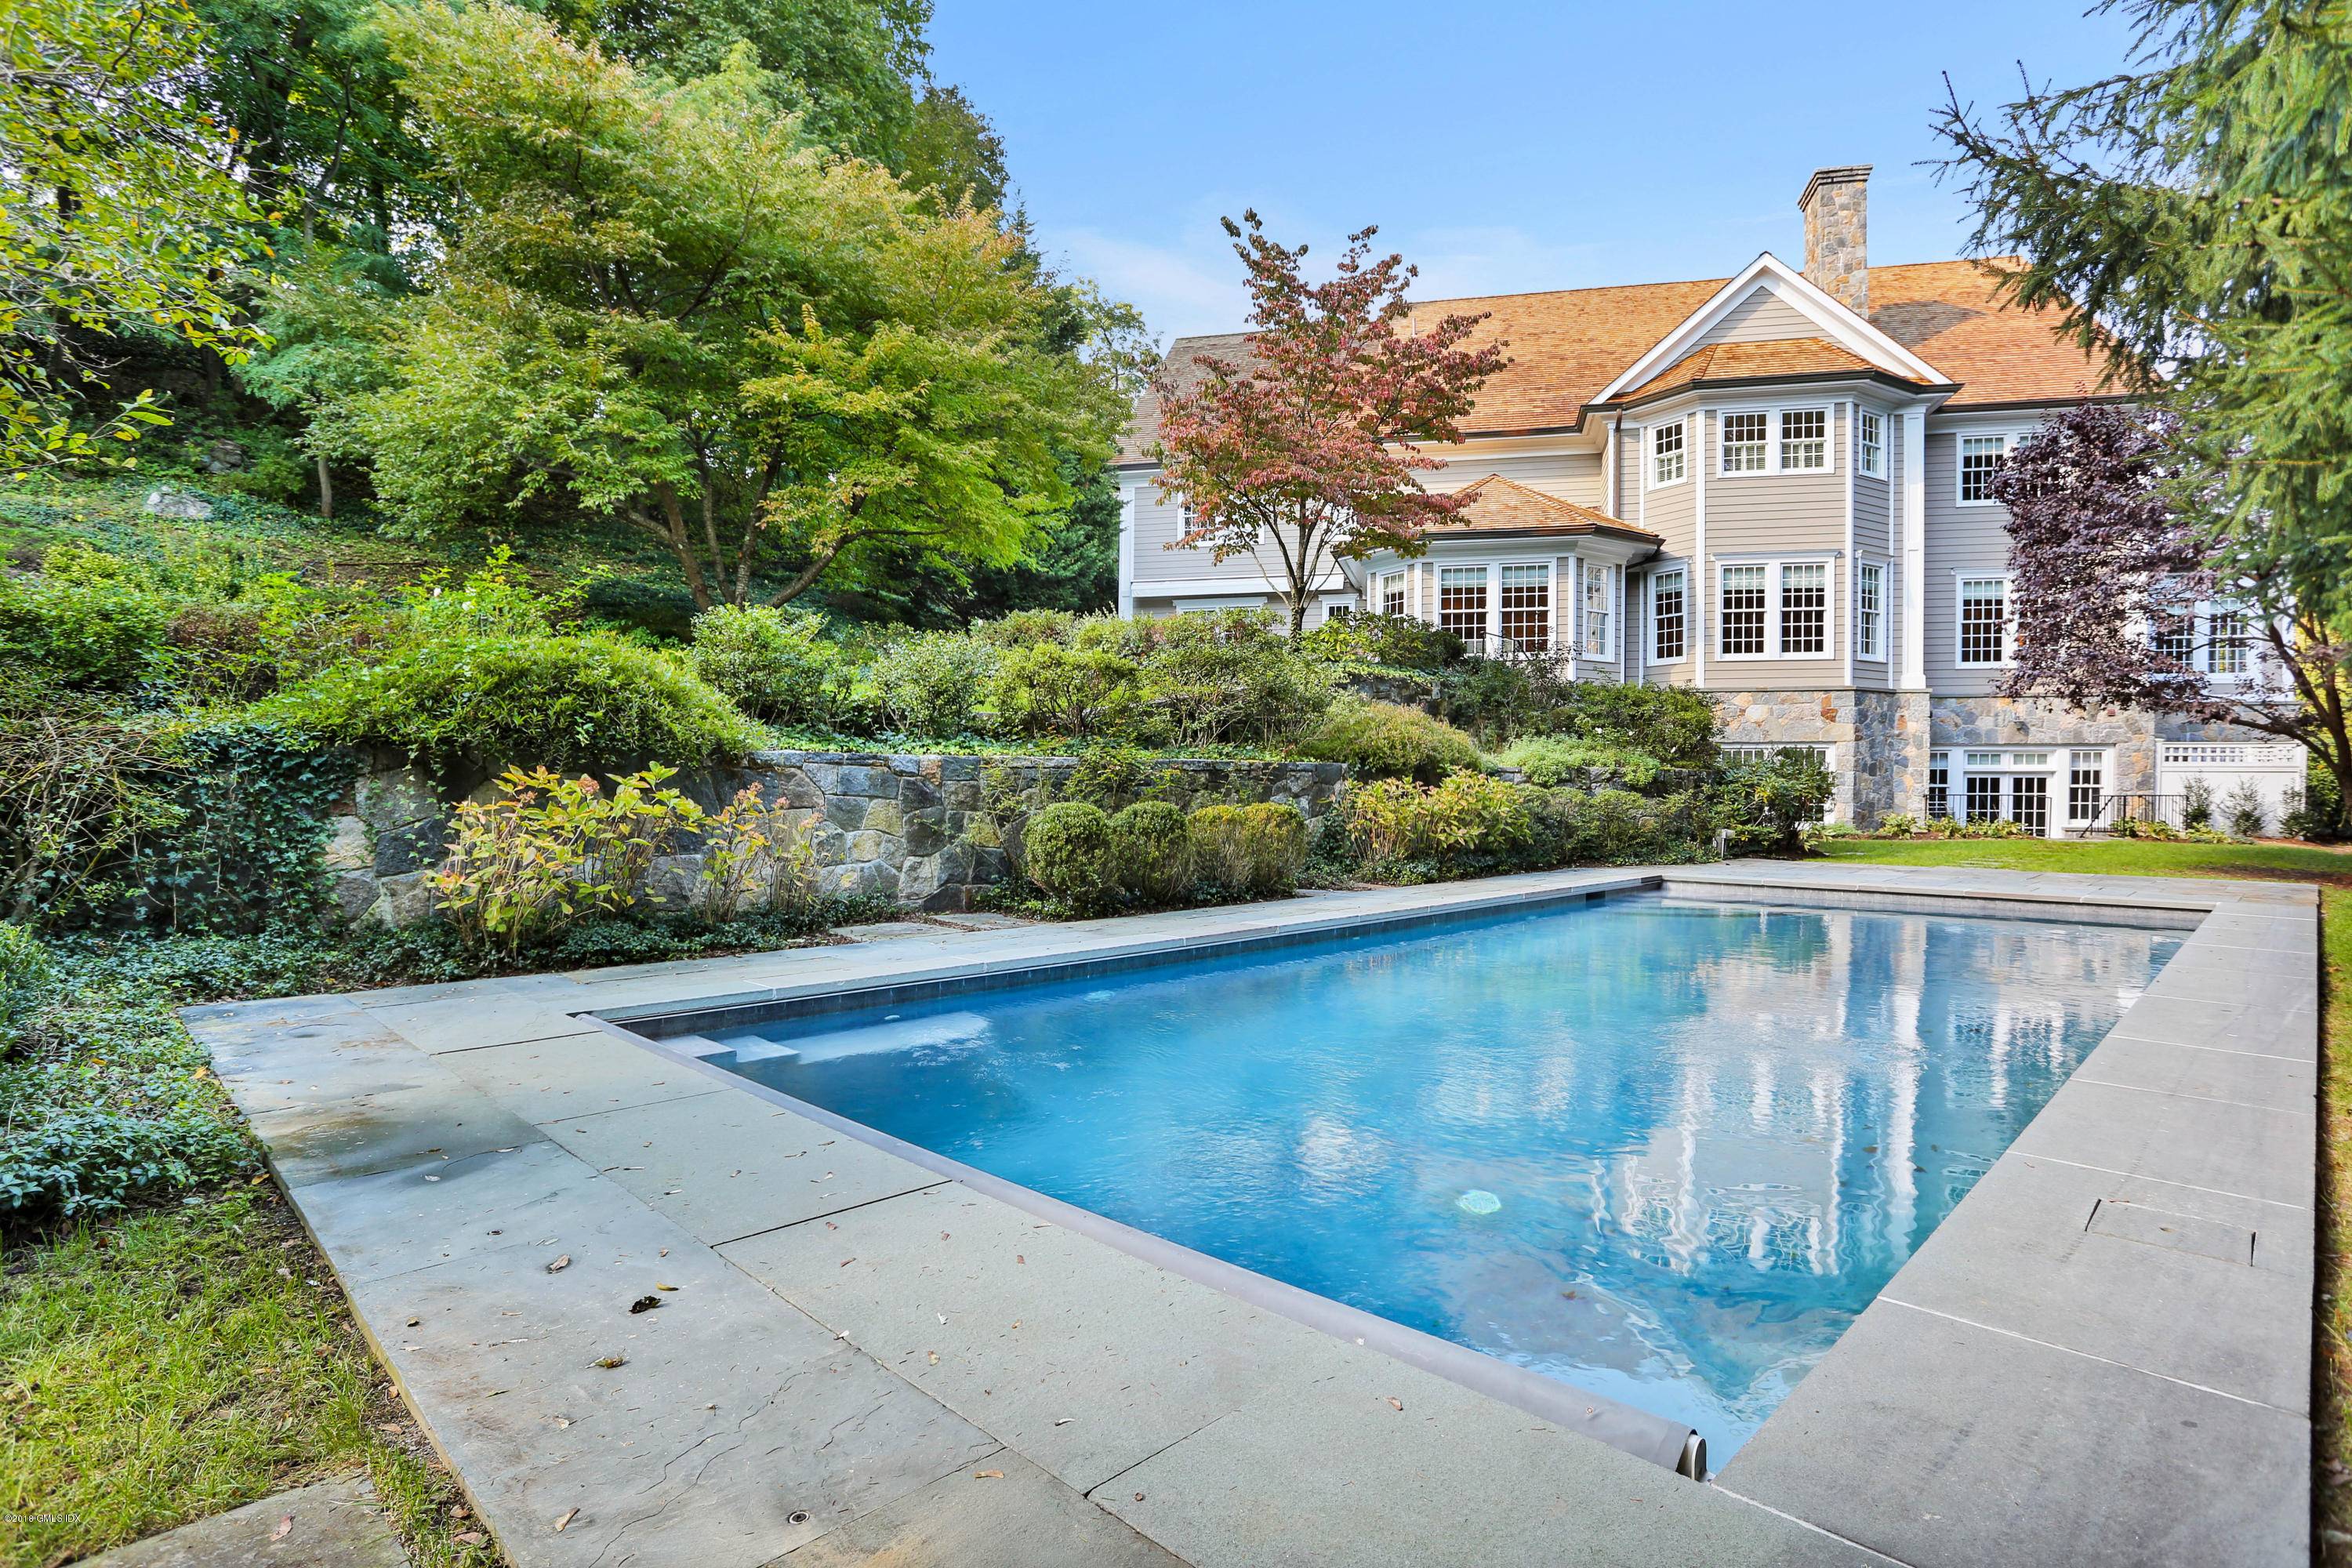 Exquisitely updated six bedroom colonial provides a peaceful oasis on a 1.